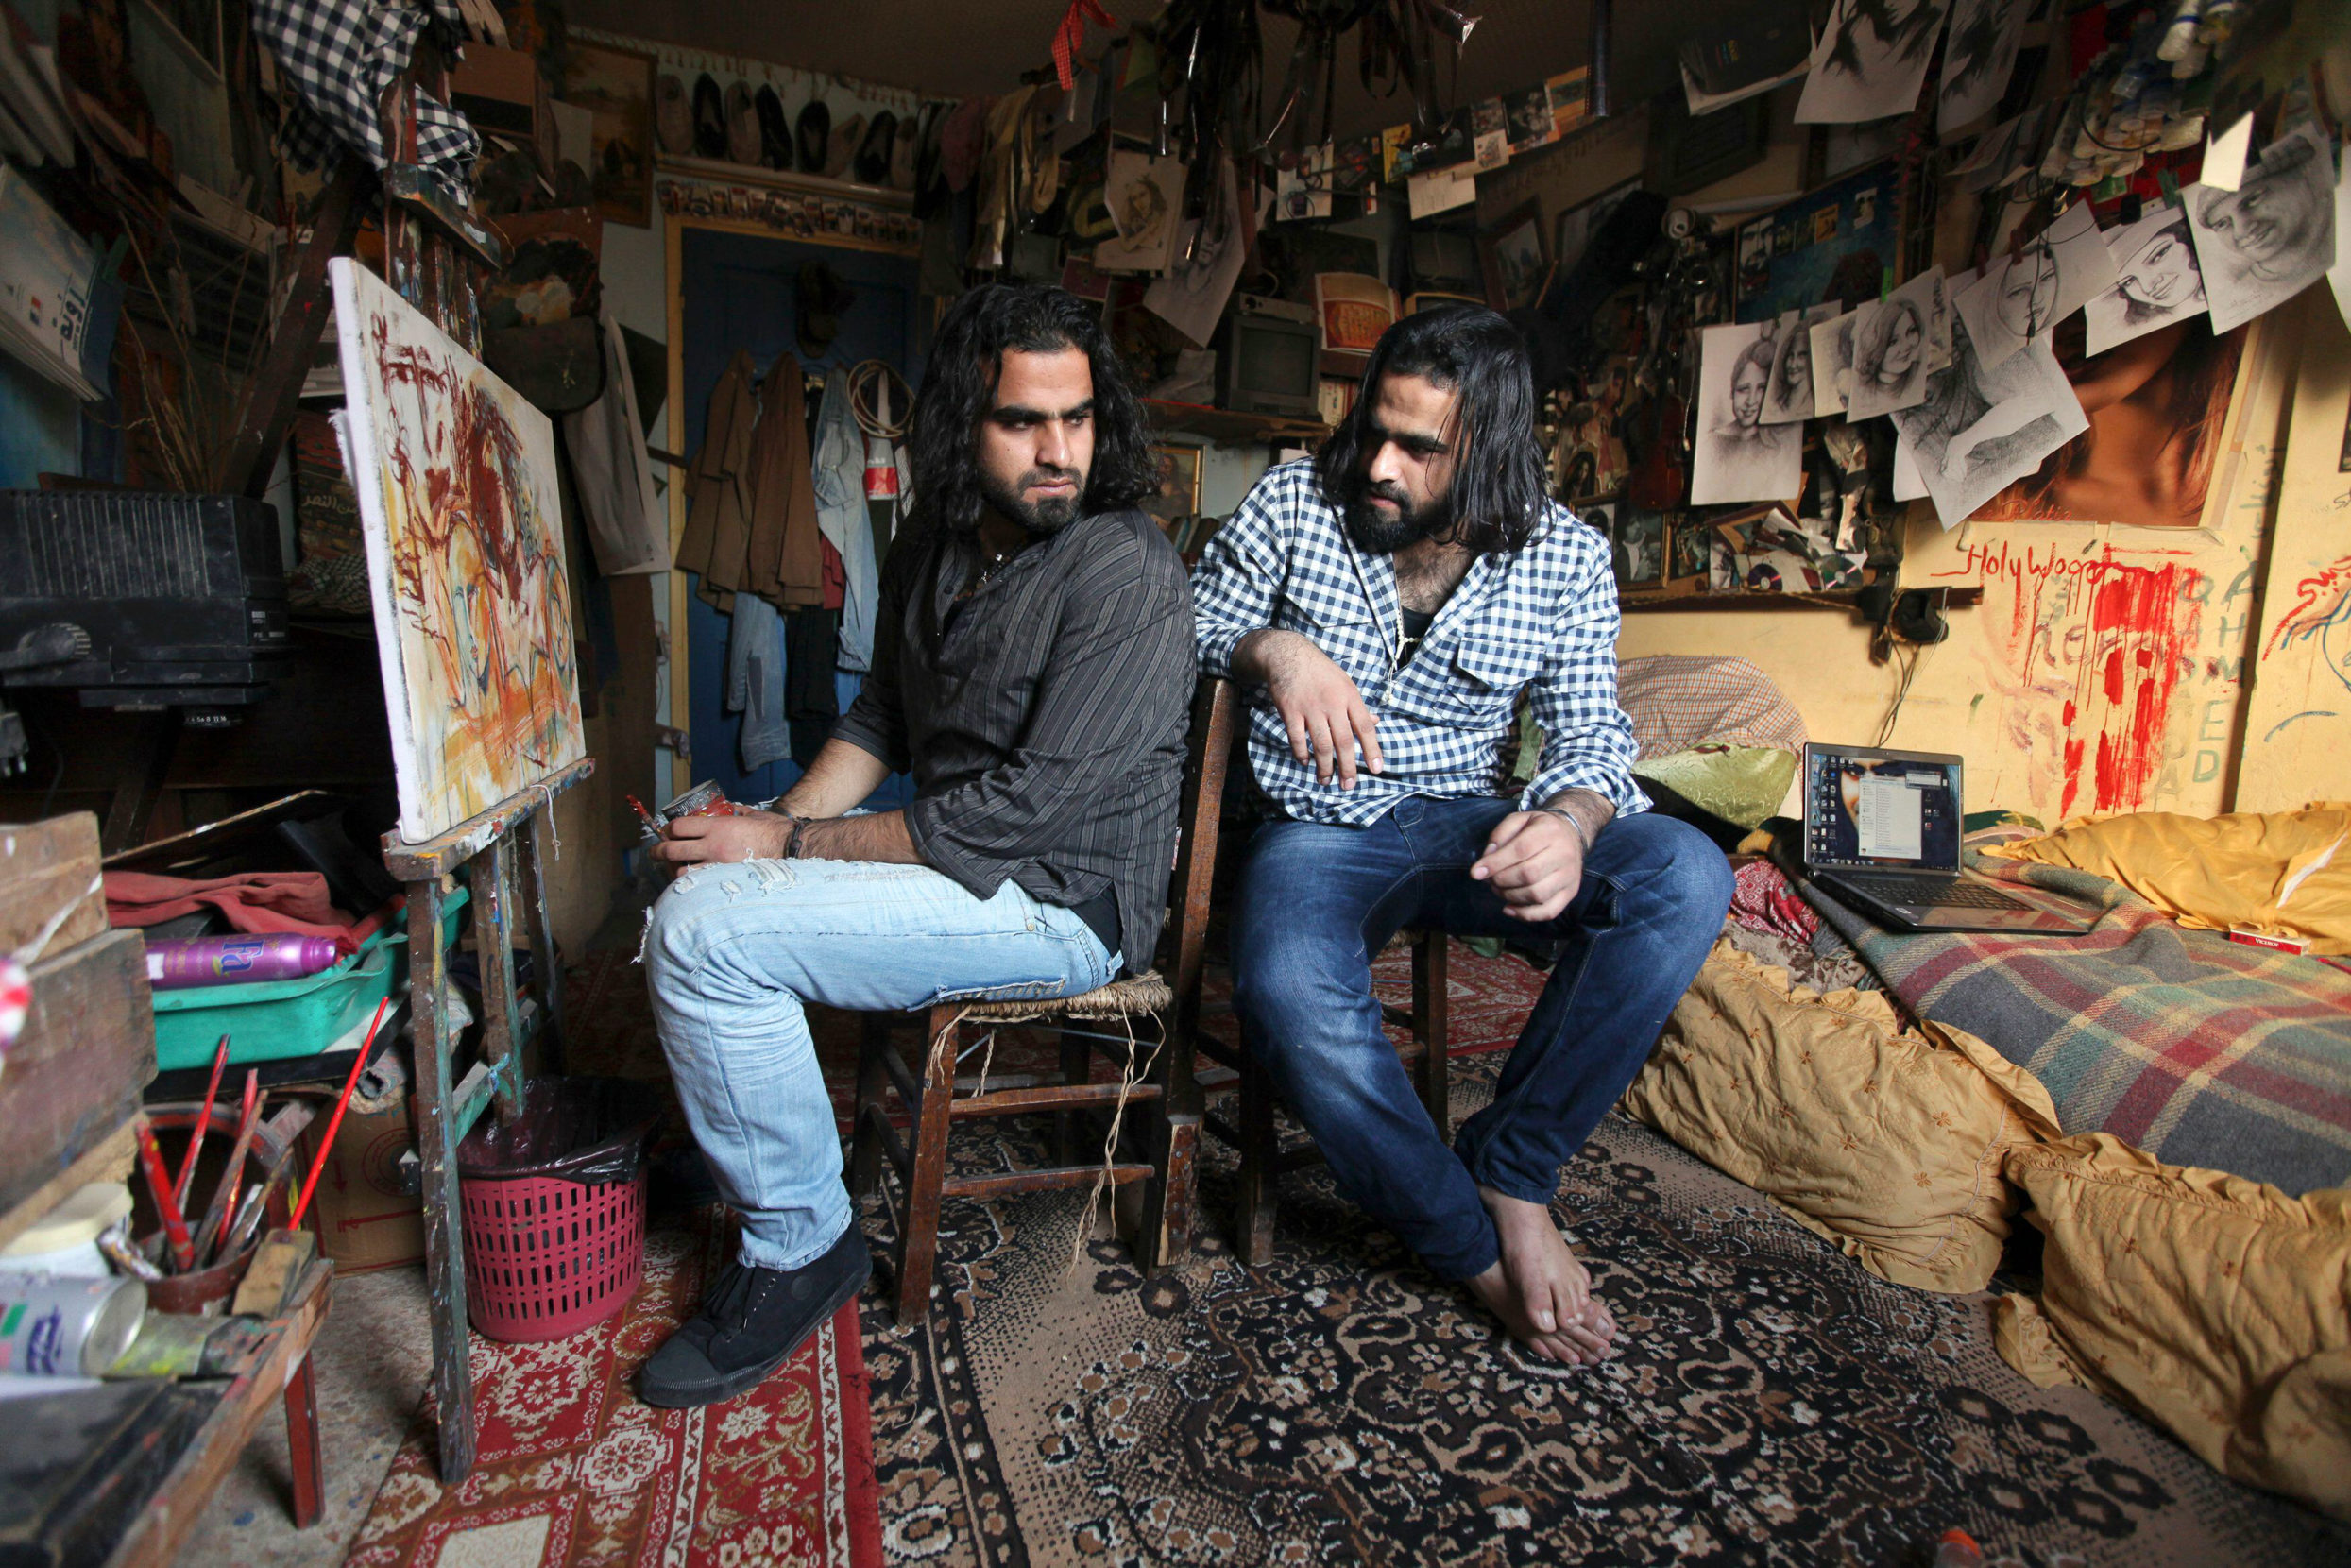 Twin brothers Ahmed and Mohamed Abu Nasser, better known as Tarzan and Arab, hold court in their Gazawood studio in 2010. Photo: Mohammed Salem/Reuters/Alamy.